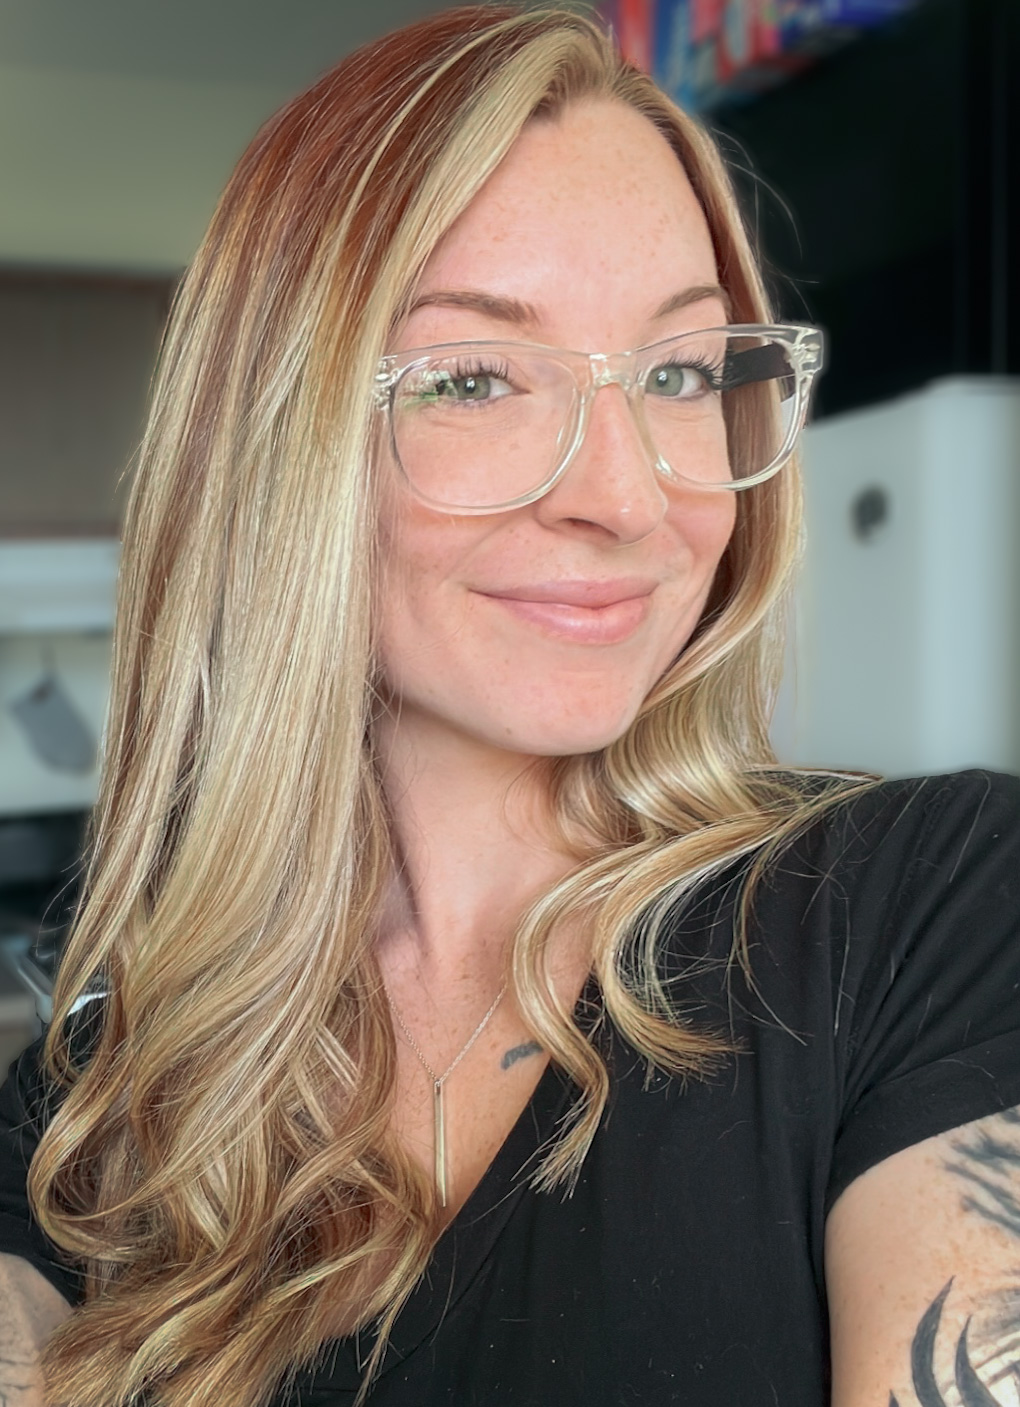 A photo of Becca Jarvis. She has long blonde hair and green eyes and is wearing clear framed glasses and a black tee shirt. She has a tattoo showing on her arm.